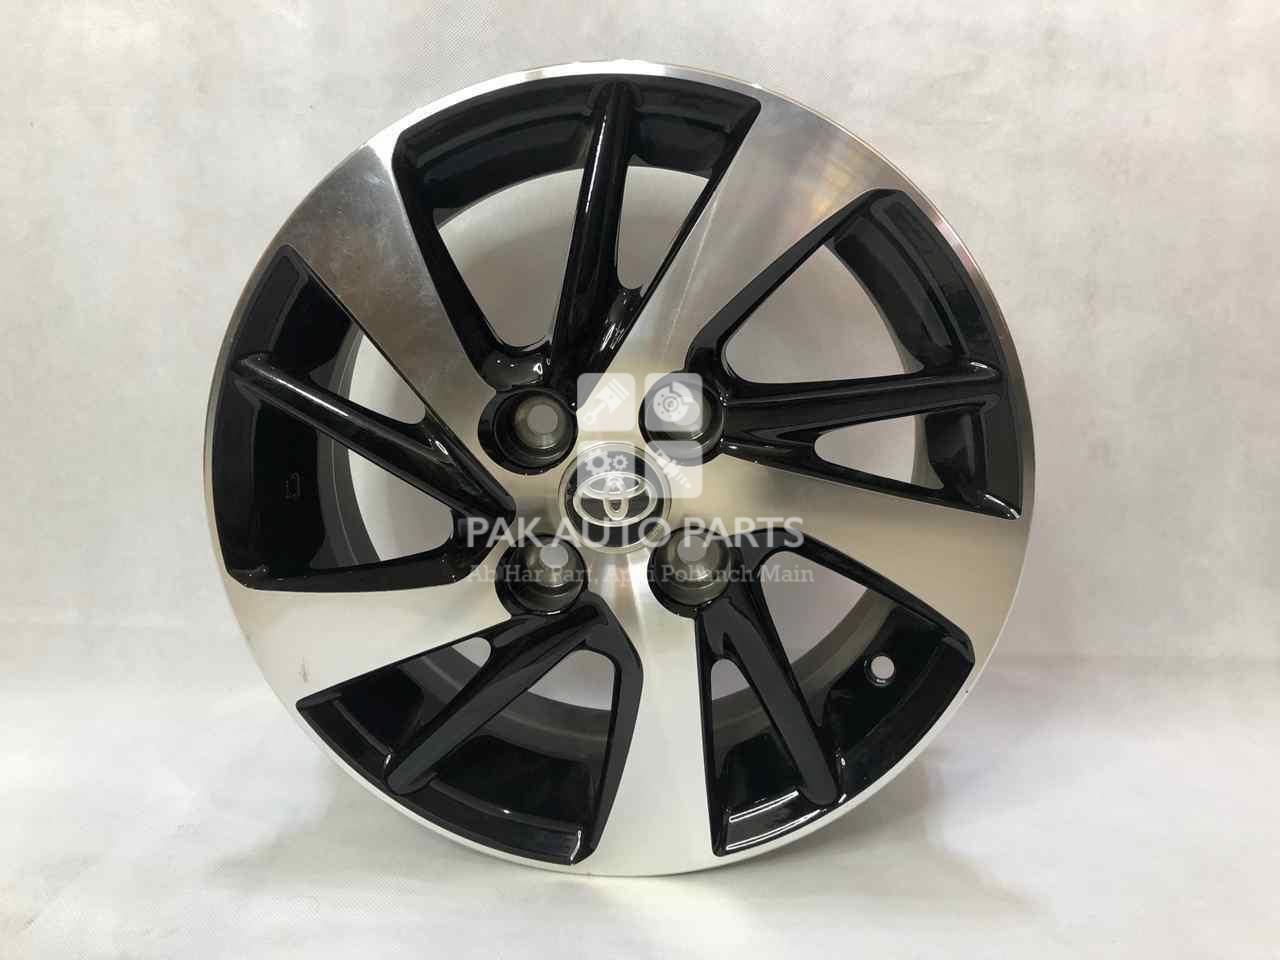 Picture of 14 Inch Alloy Rim